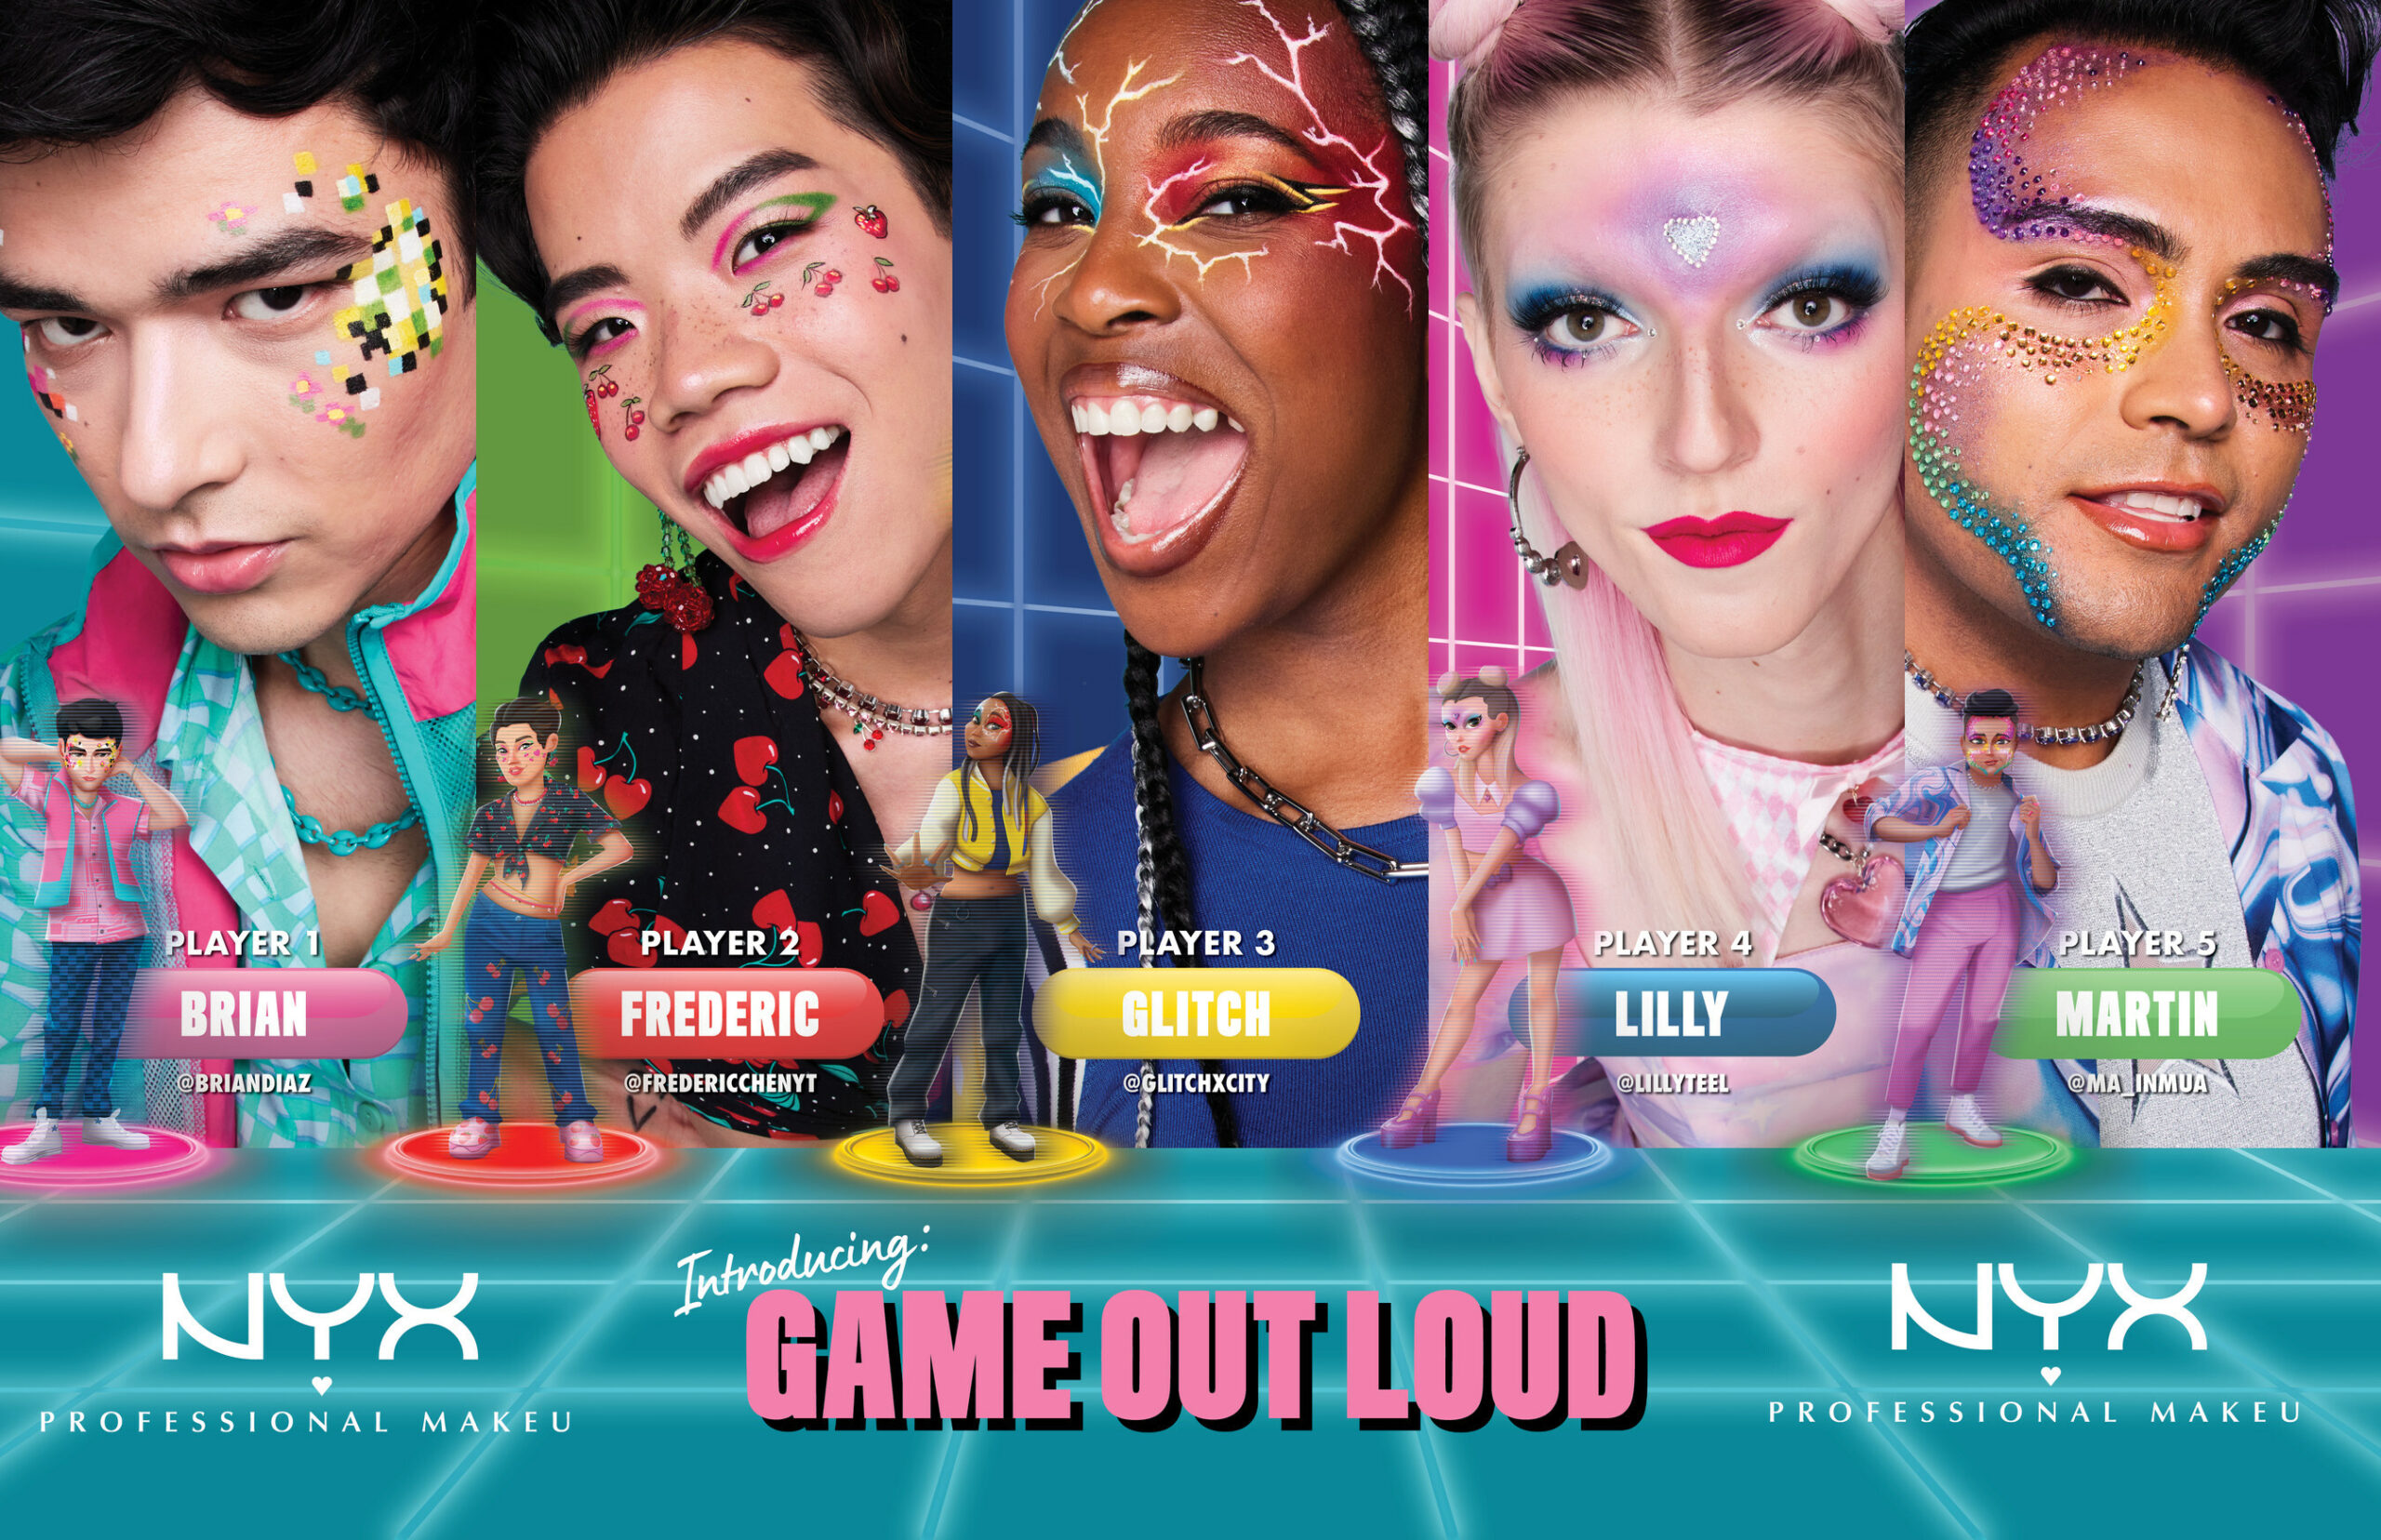 NYX Cosmetics Targets Anti-Bullying With New Delight Campaign